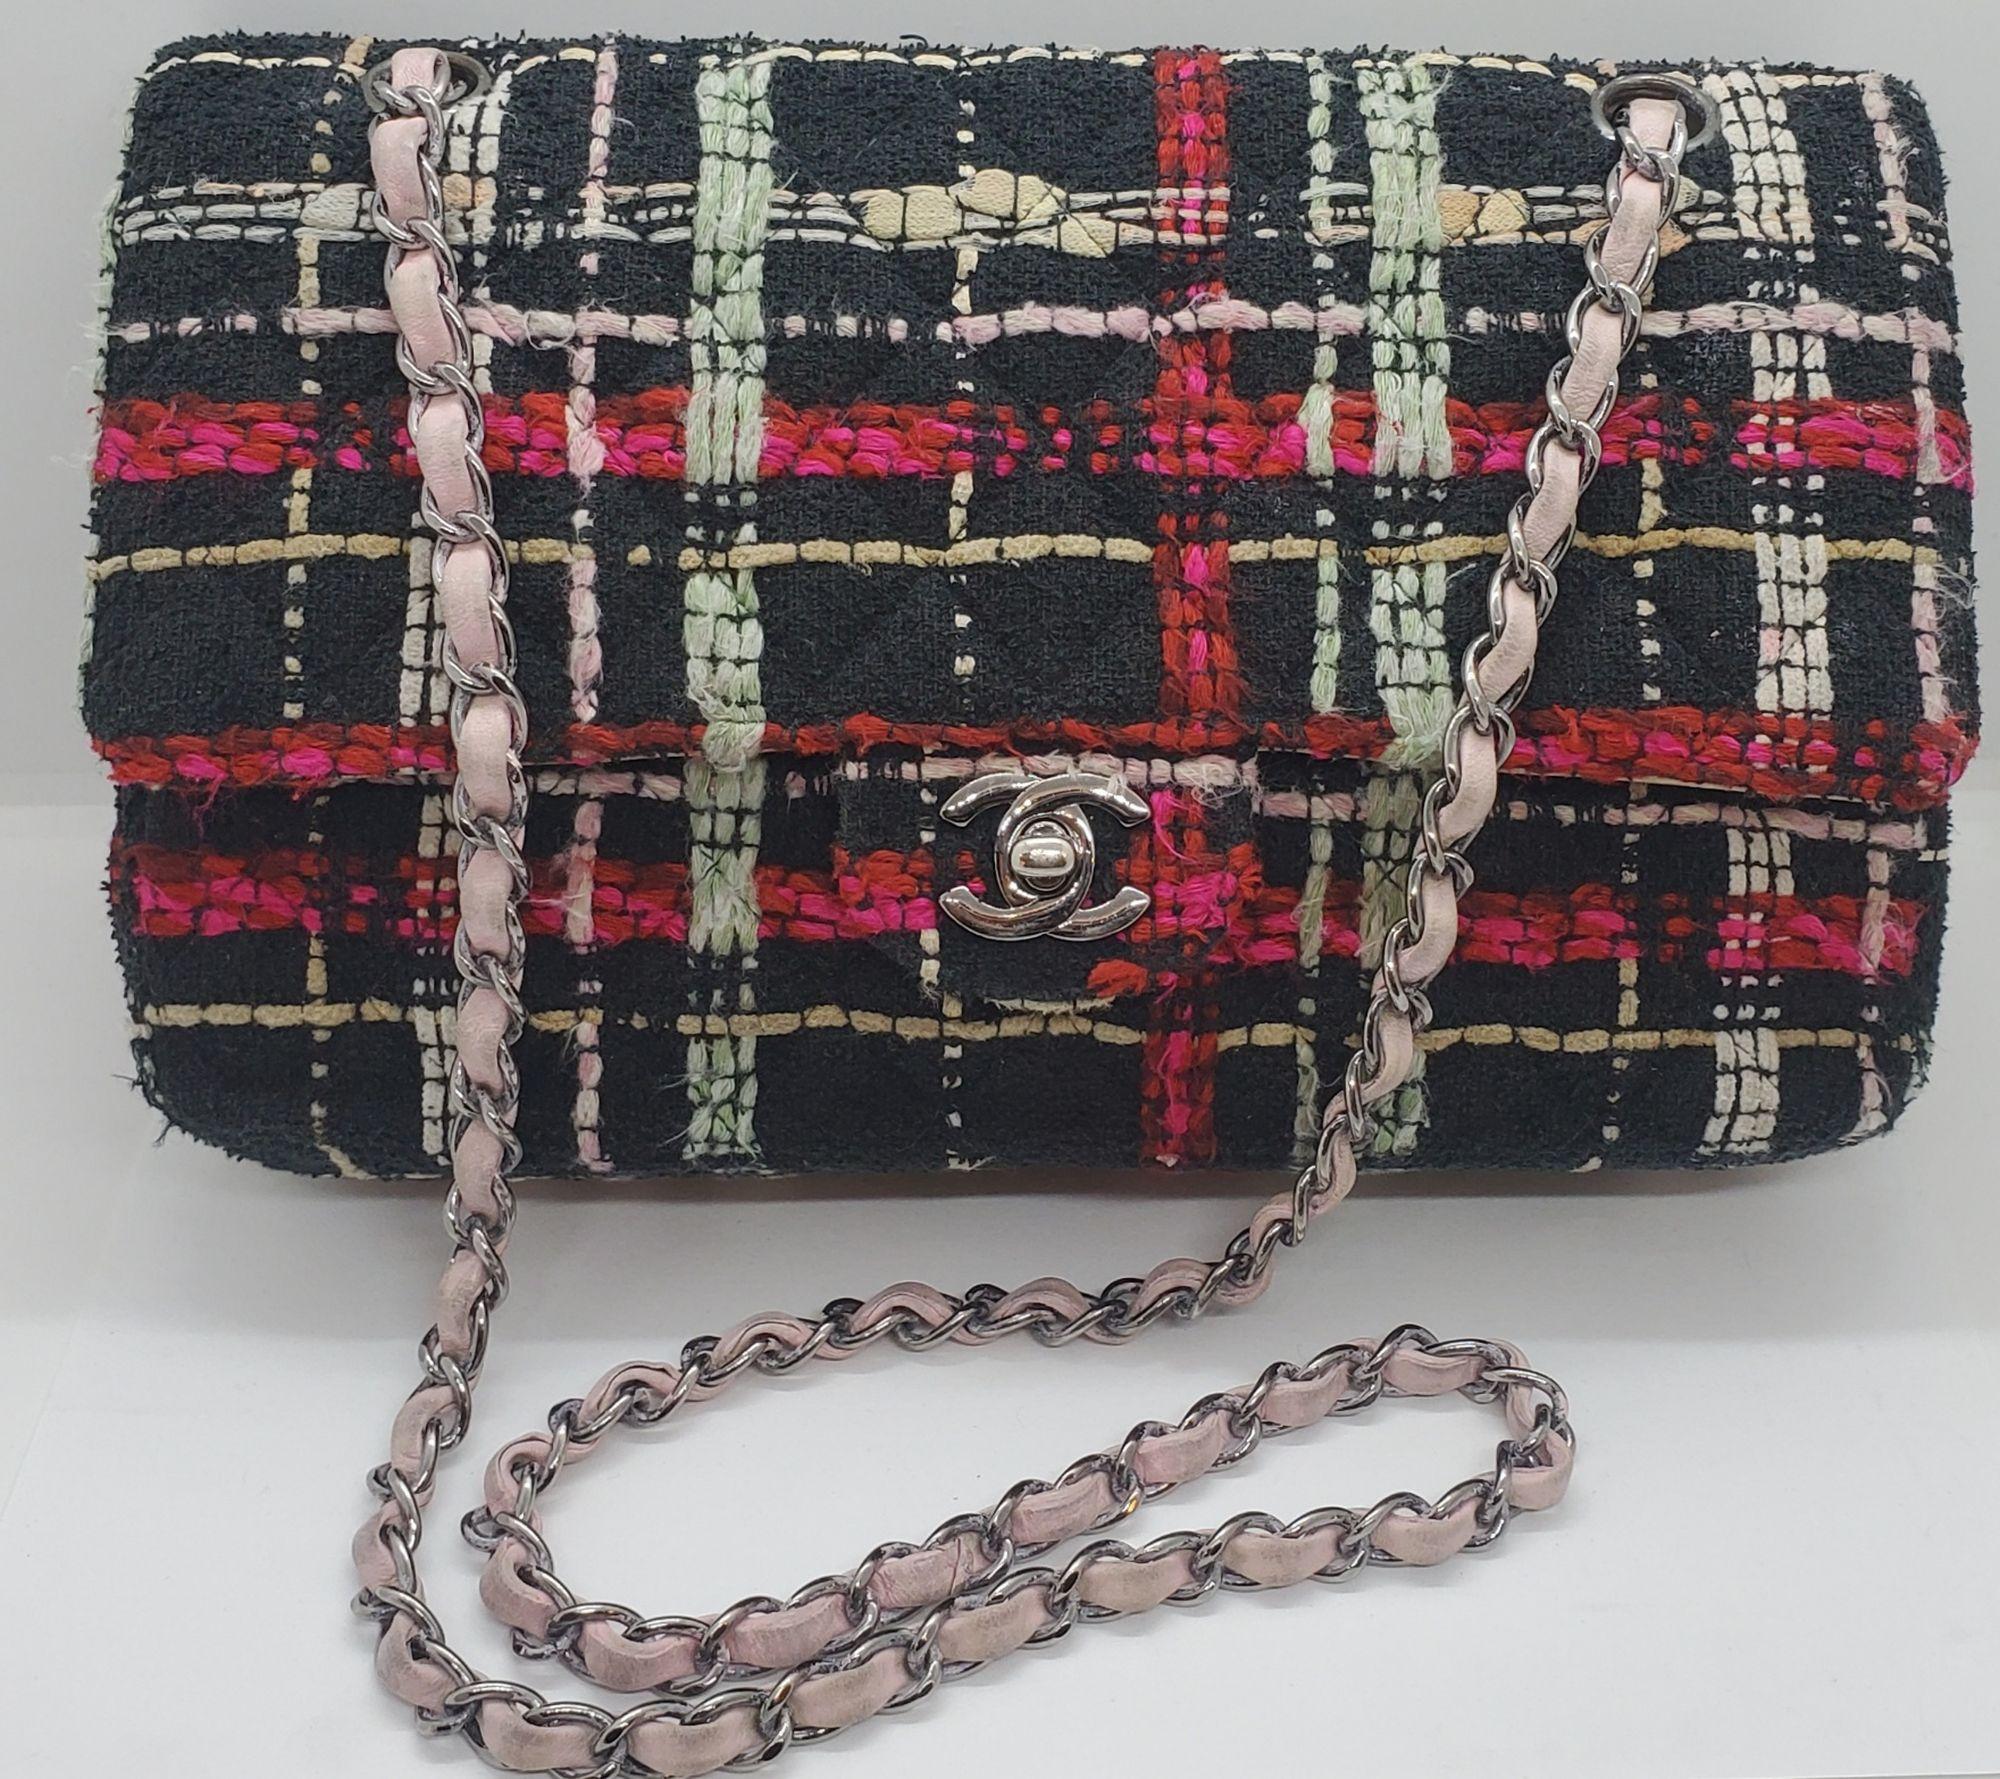 Women's Auth Classic Chanel Runway Tweed Flap Bag For Sale